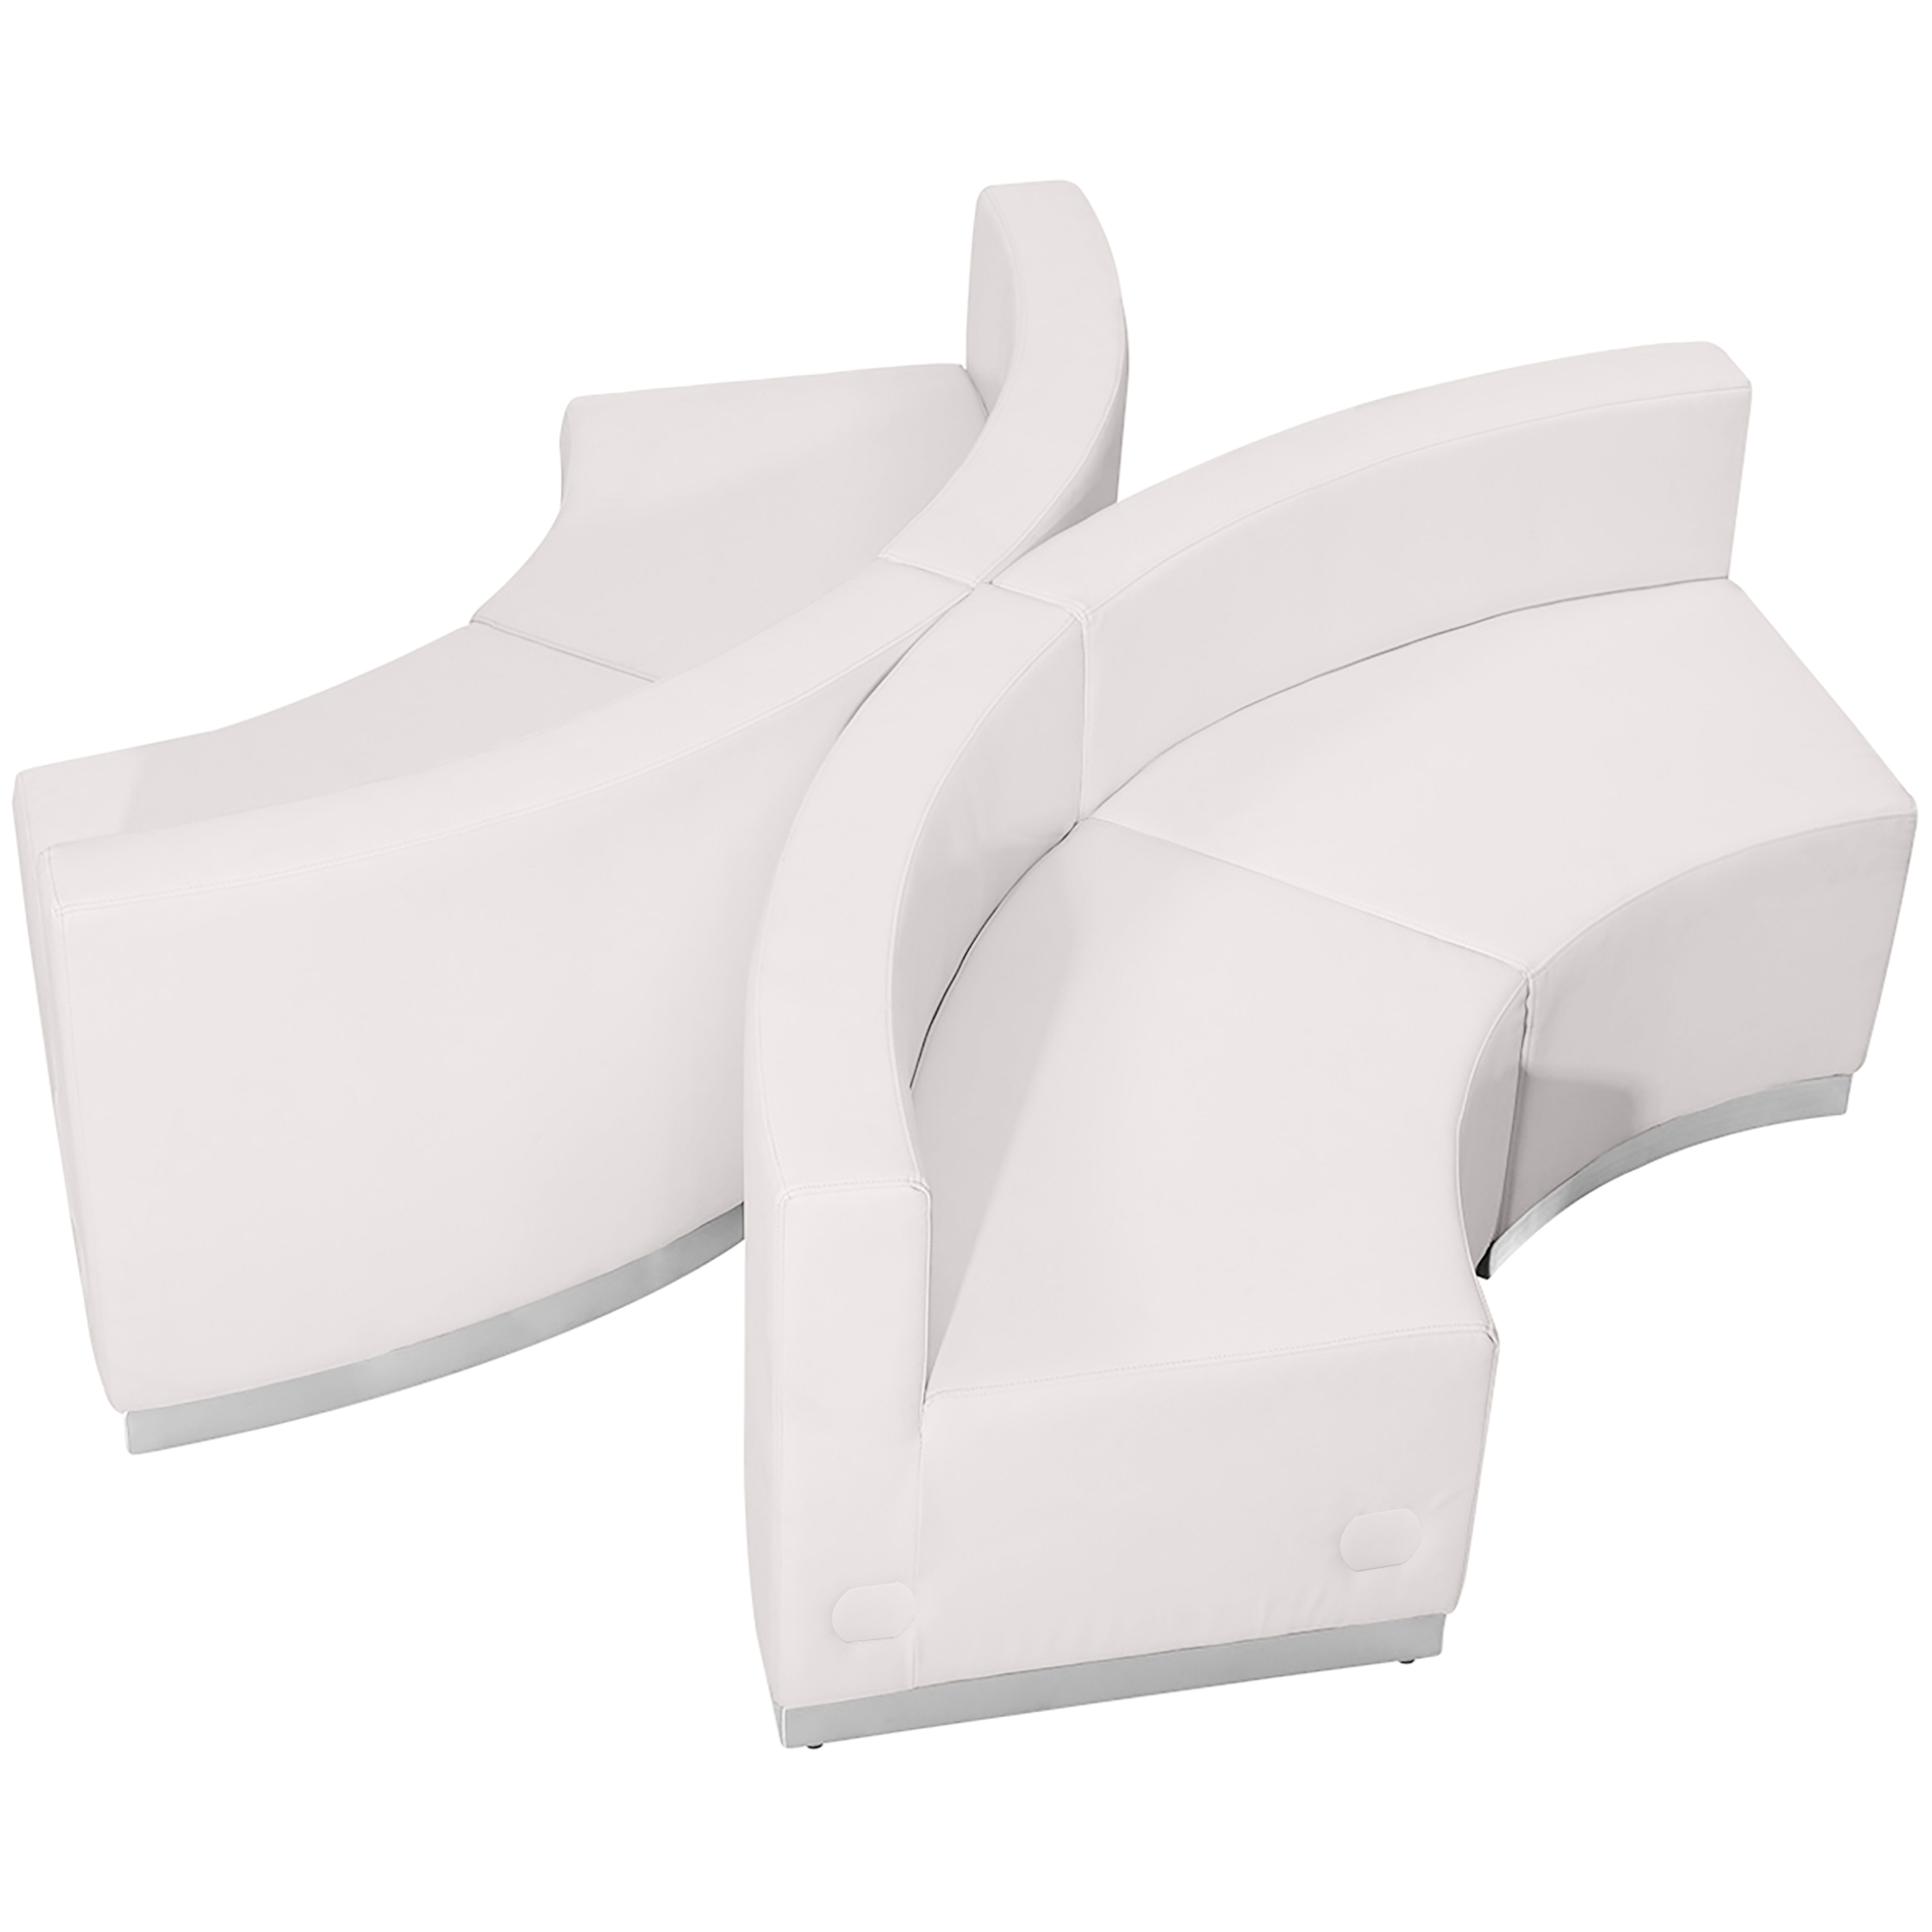 Flash Furniture, 4 PC White LeatherSoft Reception Configuration, Primary Color White, Included (qty.) 4, Model ZB803840SWH